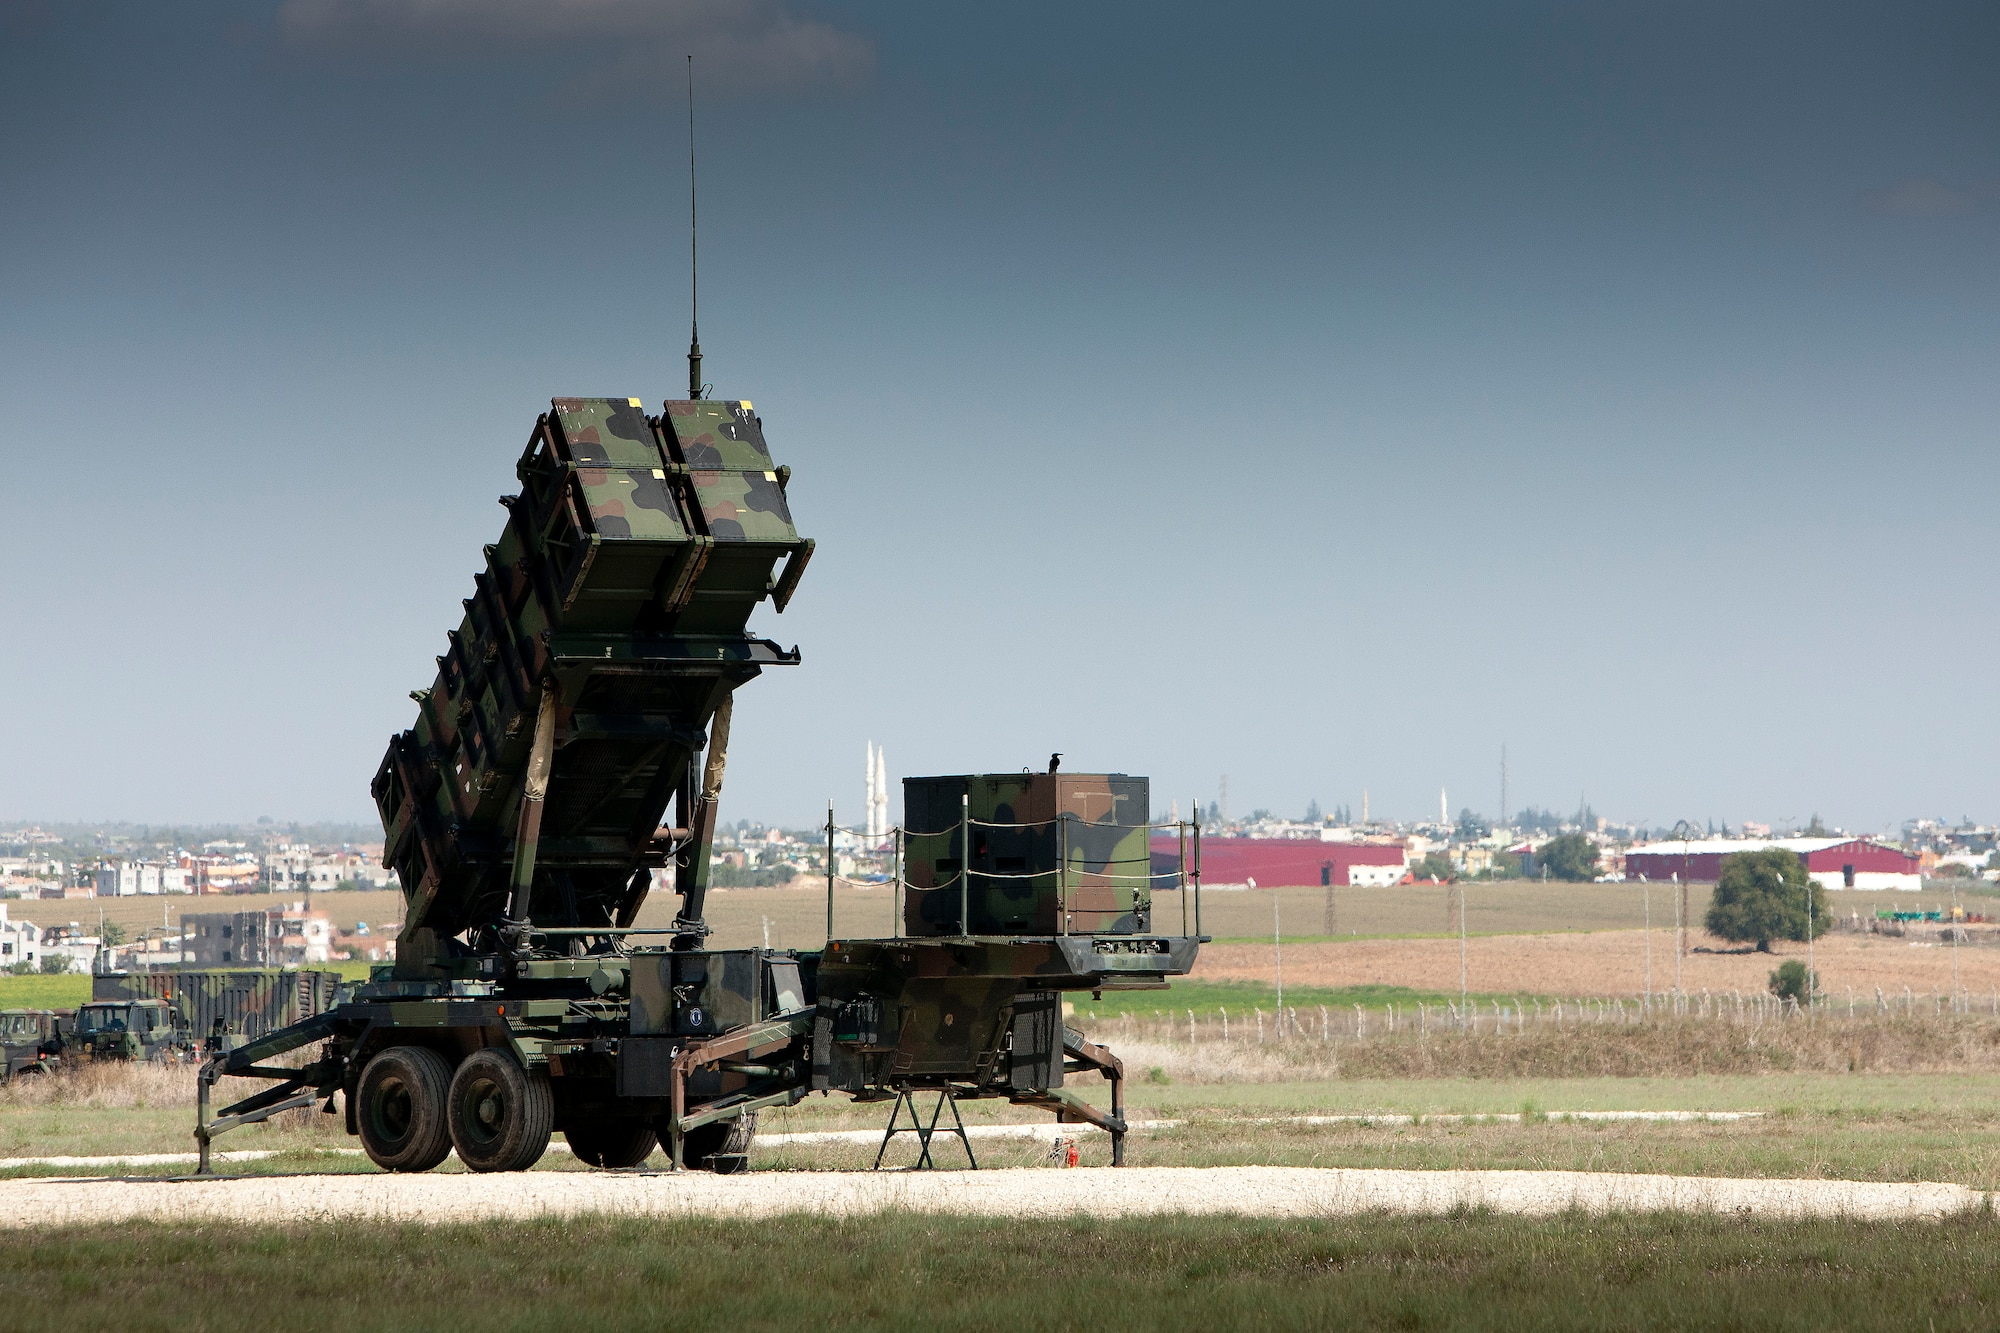 A Patriot missile sits at the ready Sept. 26, 2013, at Incirlik Air Base, Turkey. The Royal Netherlands army and air forces provided support to the ongoing NATO mission Operation Active Fence by maintaining two Patriot batteries in Turkey. (Courtesy Photo) 